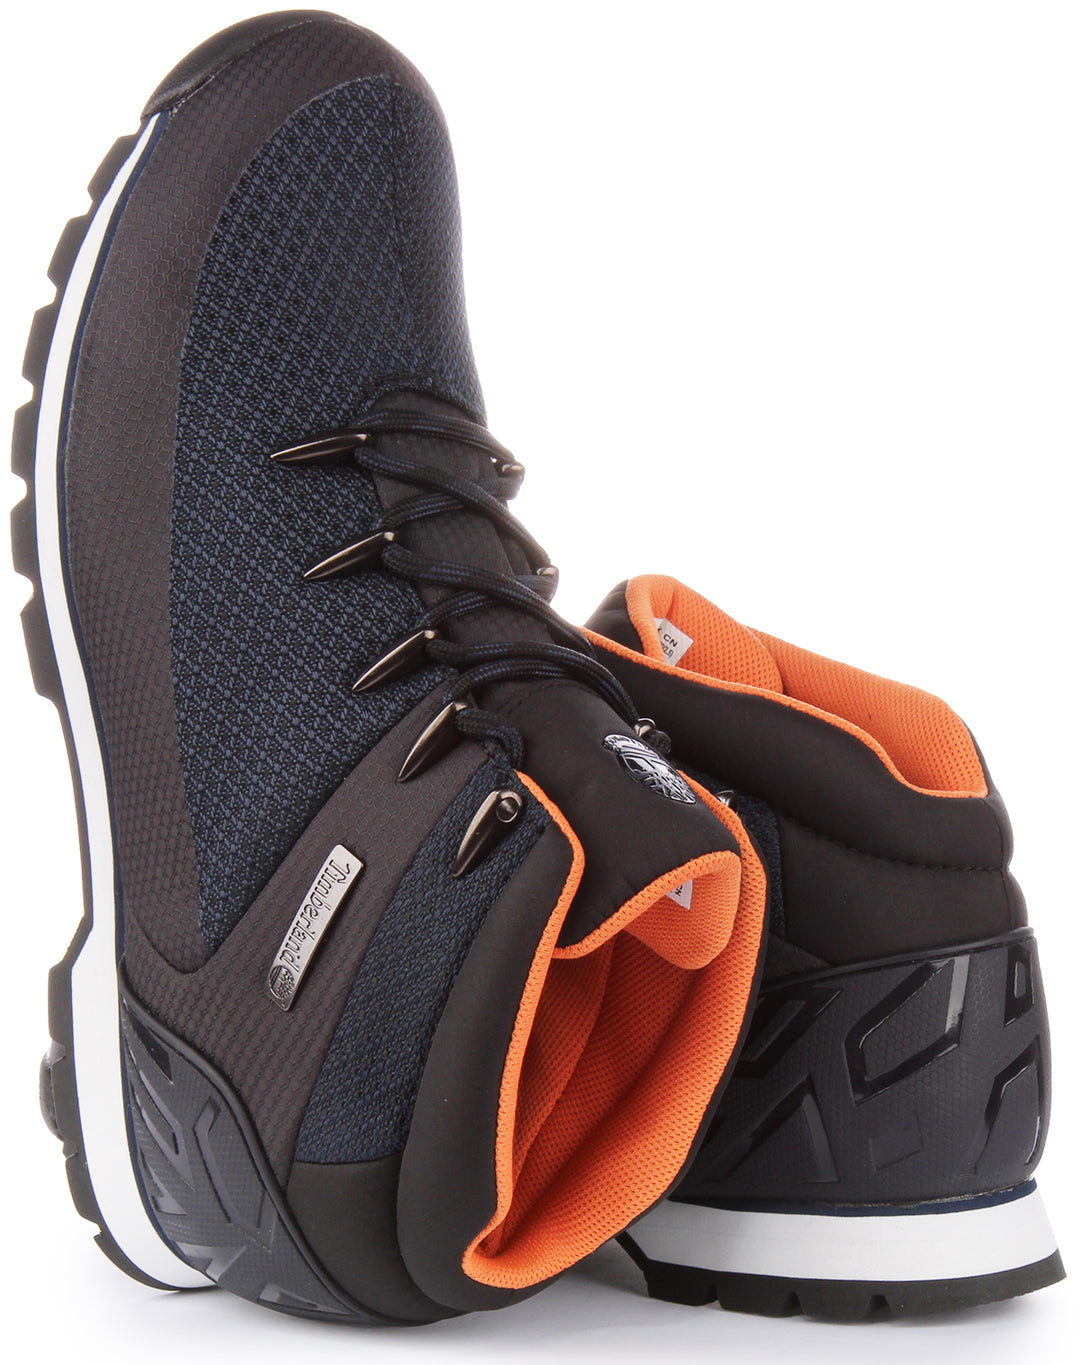 Timberland A1Qka Euro Sprint Mid Hiker In Navy